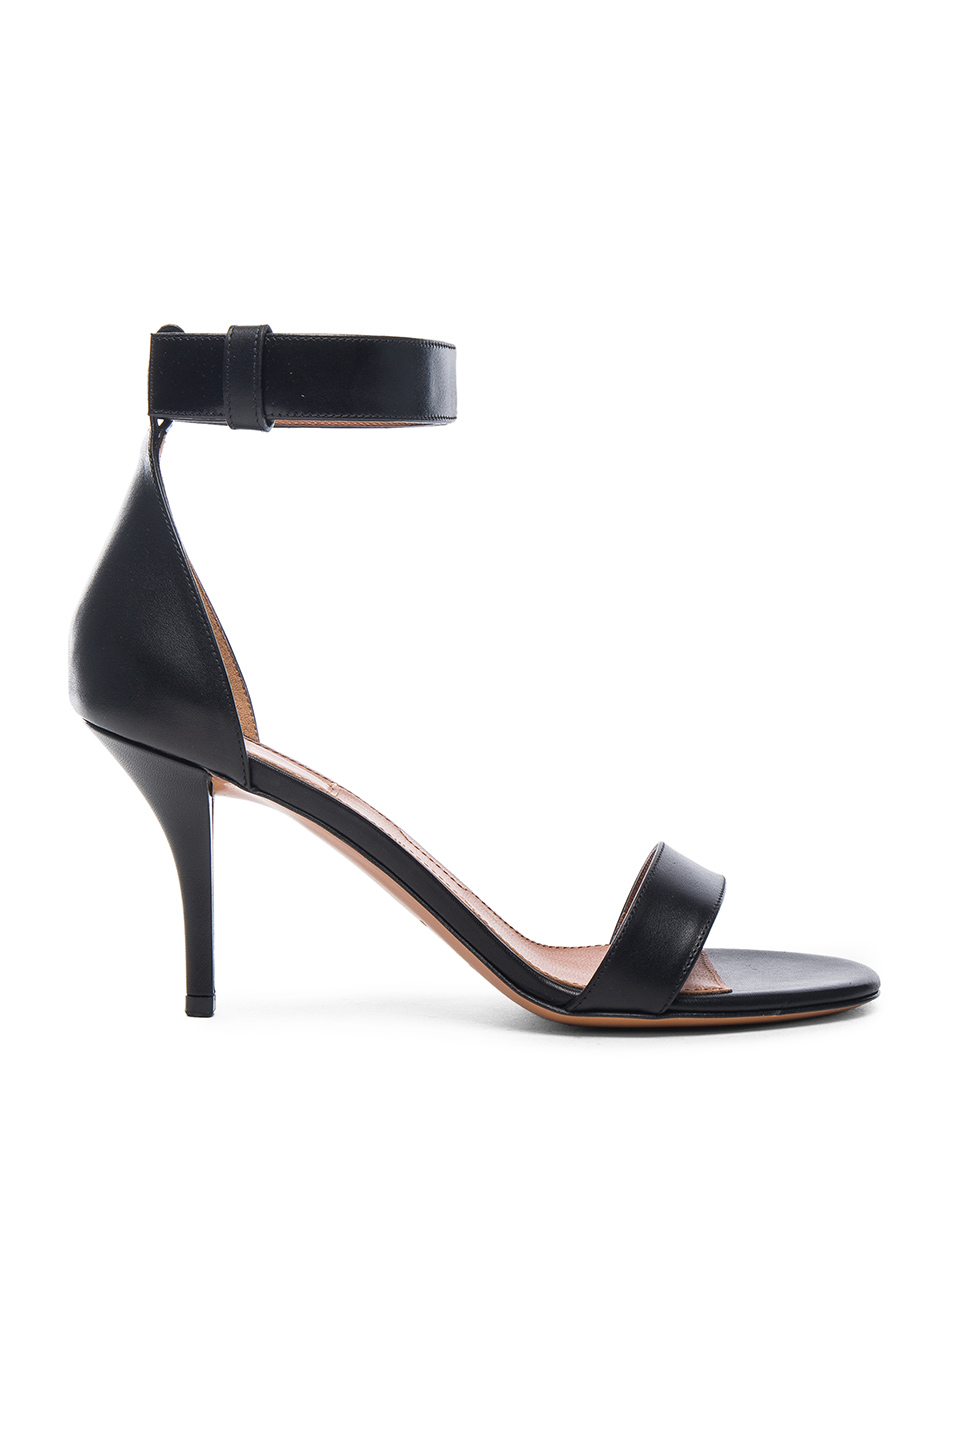 GIVENCHY 100Mm Retra Leather Sandals, Black | ModeSens